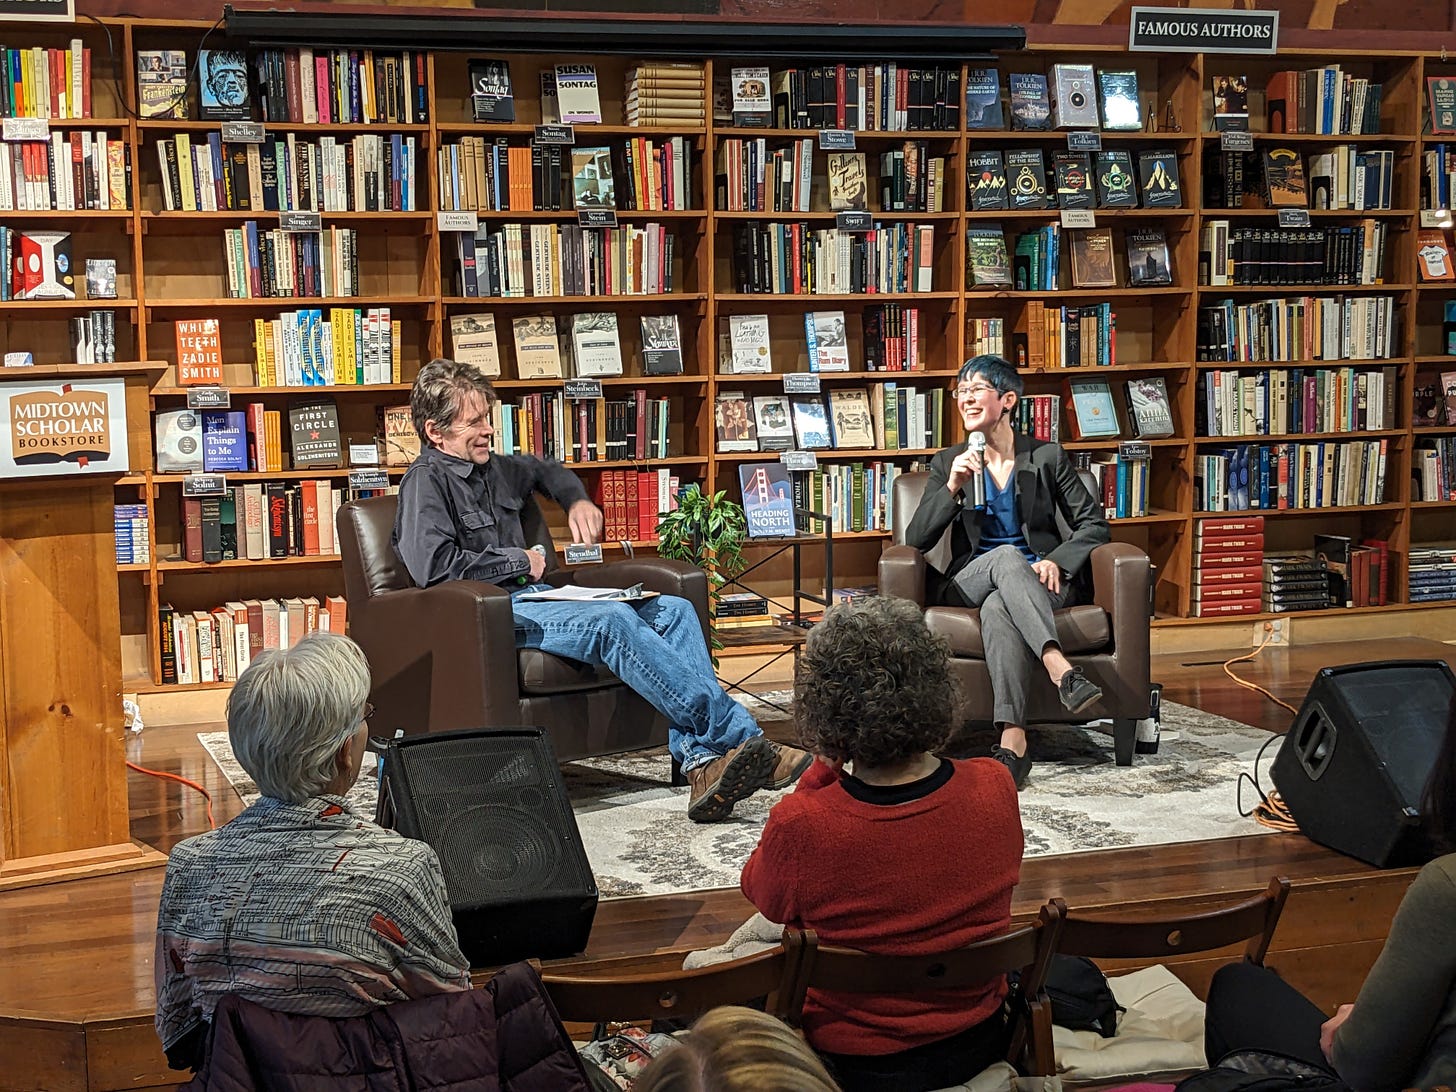 A photo of authors Curtis Smith and Holly M Wendt in conversation at Midtown Scholar bookstore. Both writers are seated in front of a wall of books.